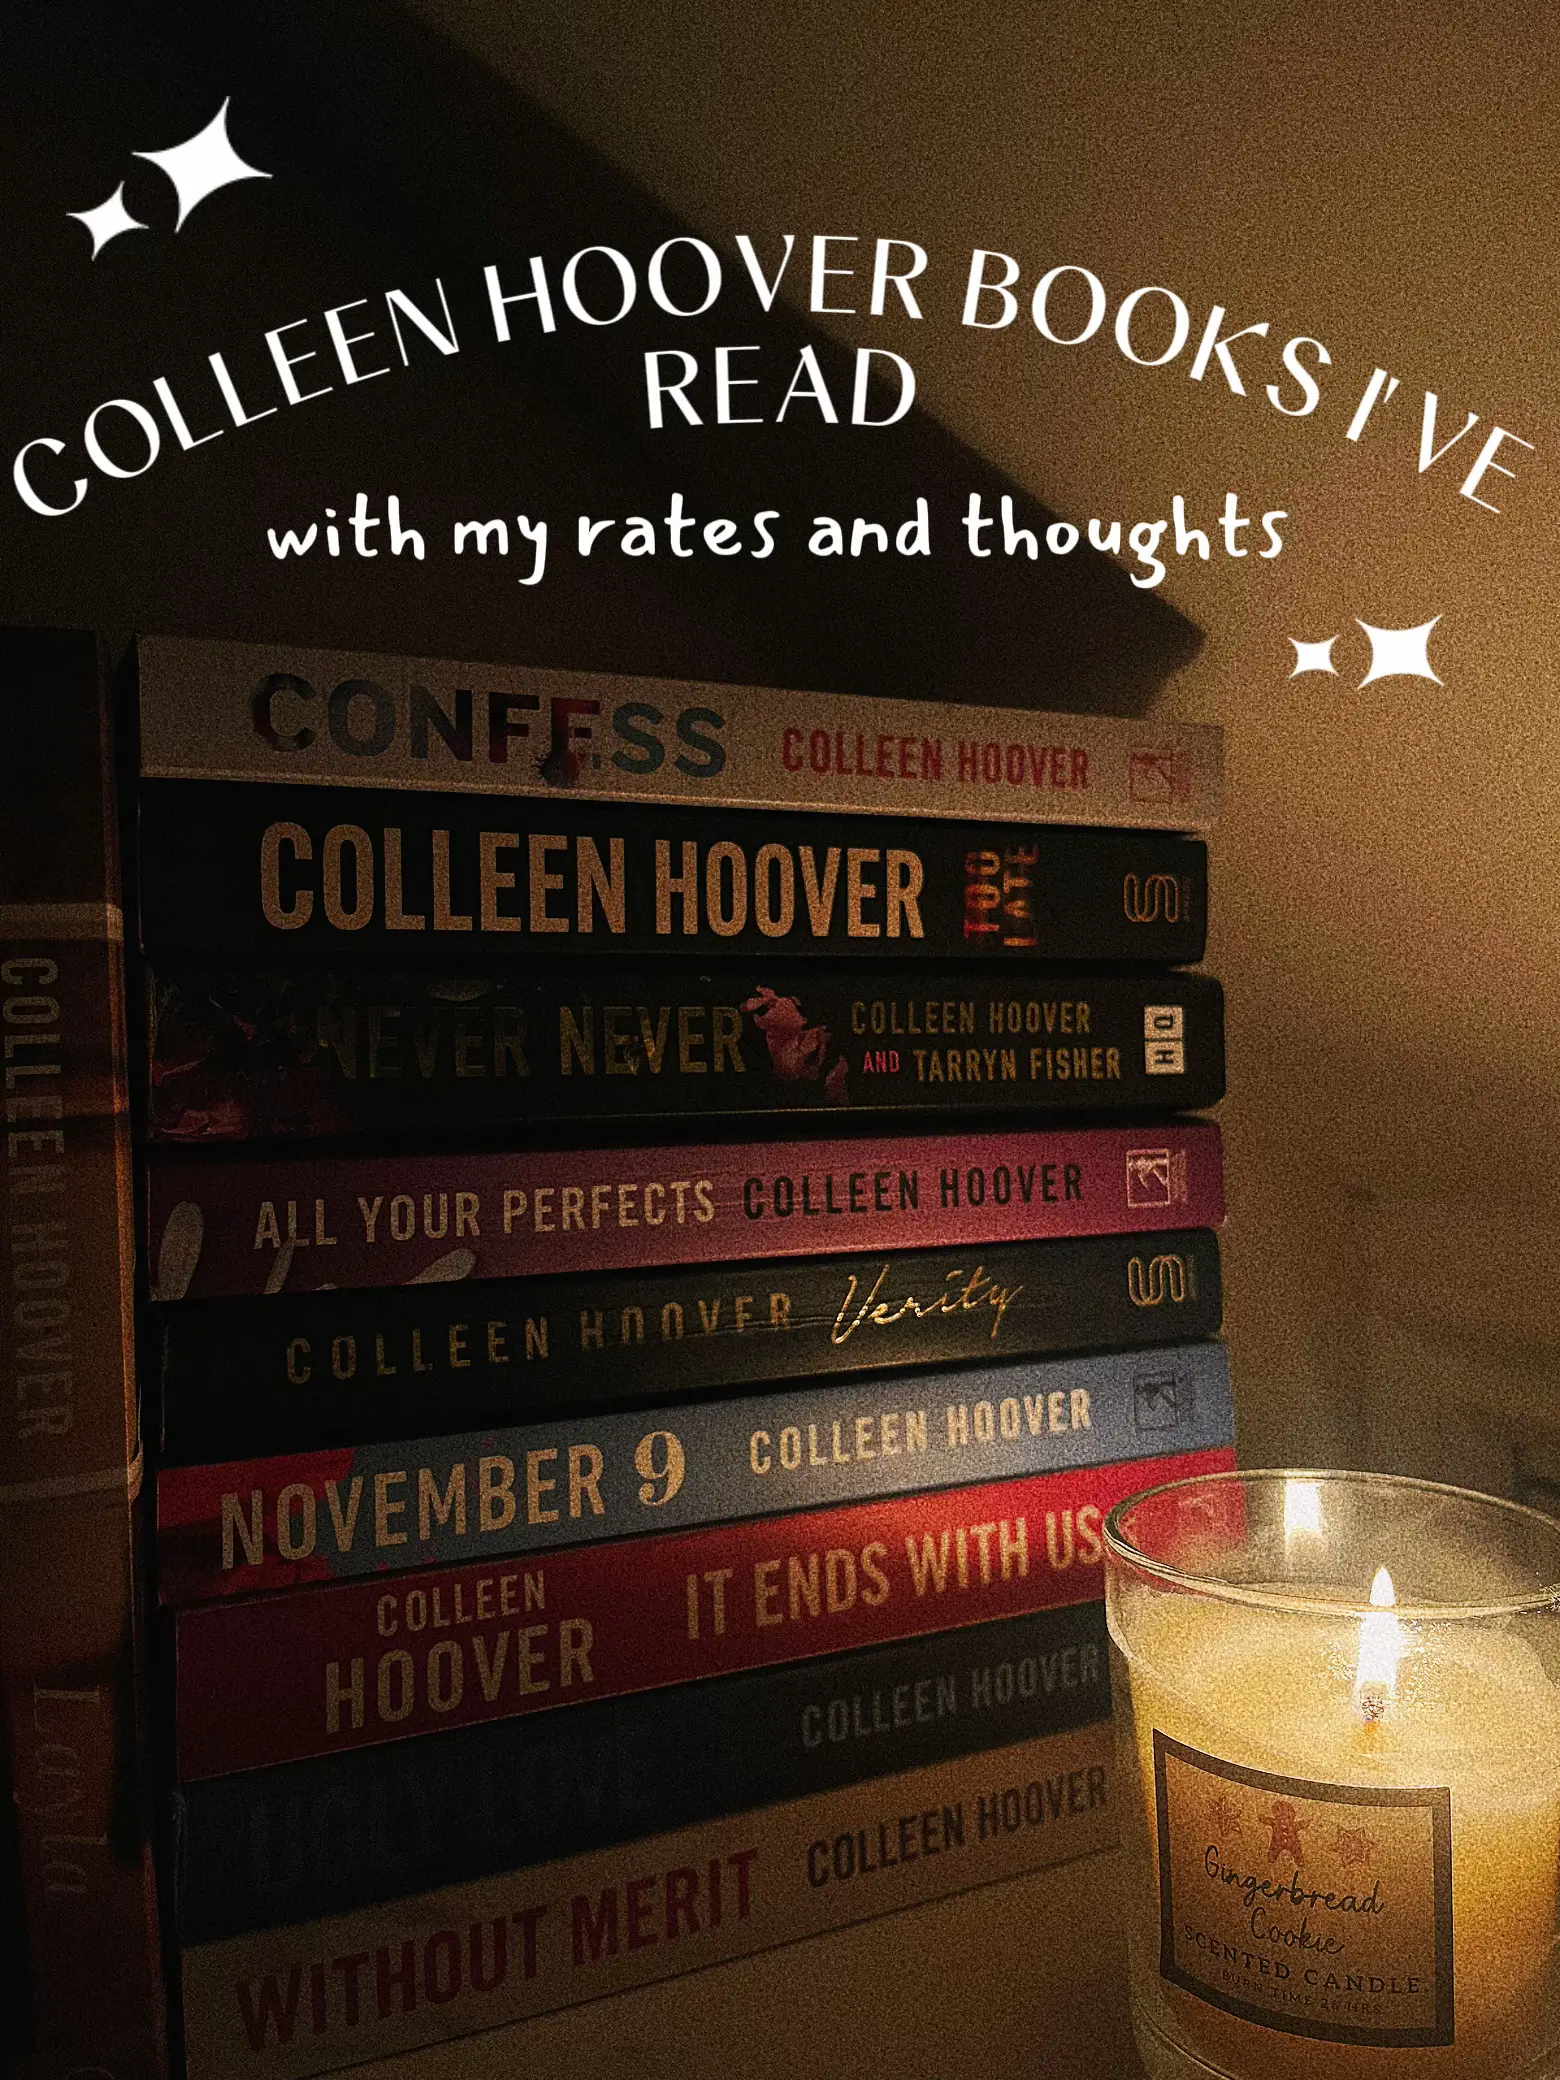 Verity by Colleen Hoover - Tea Leaves & Reads